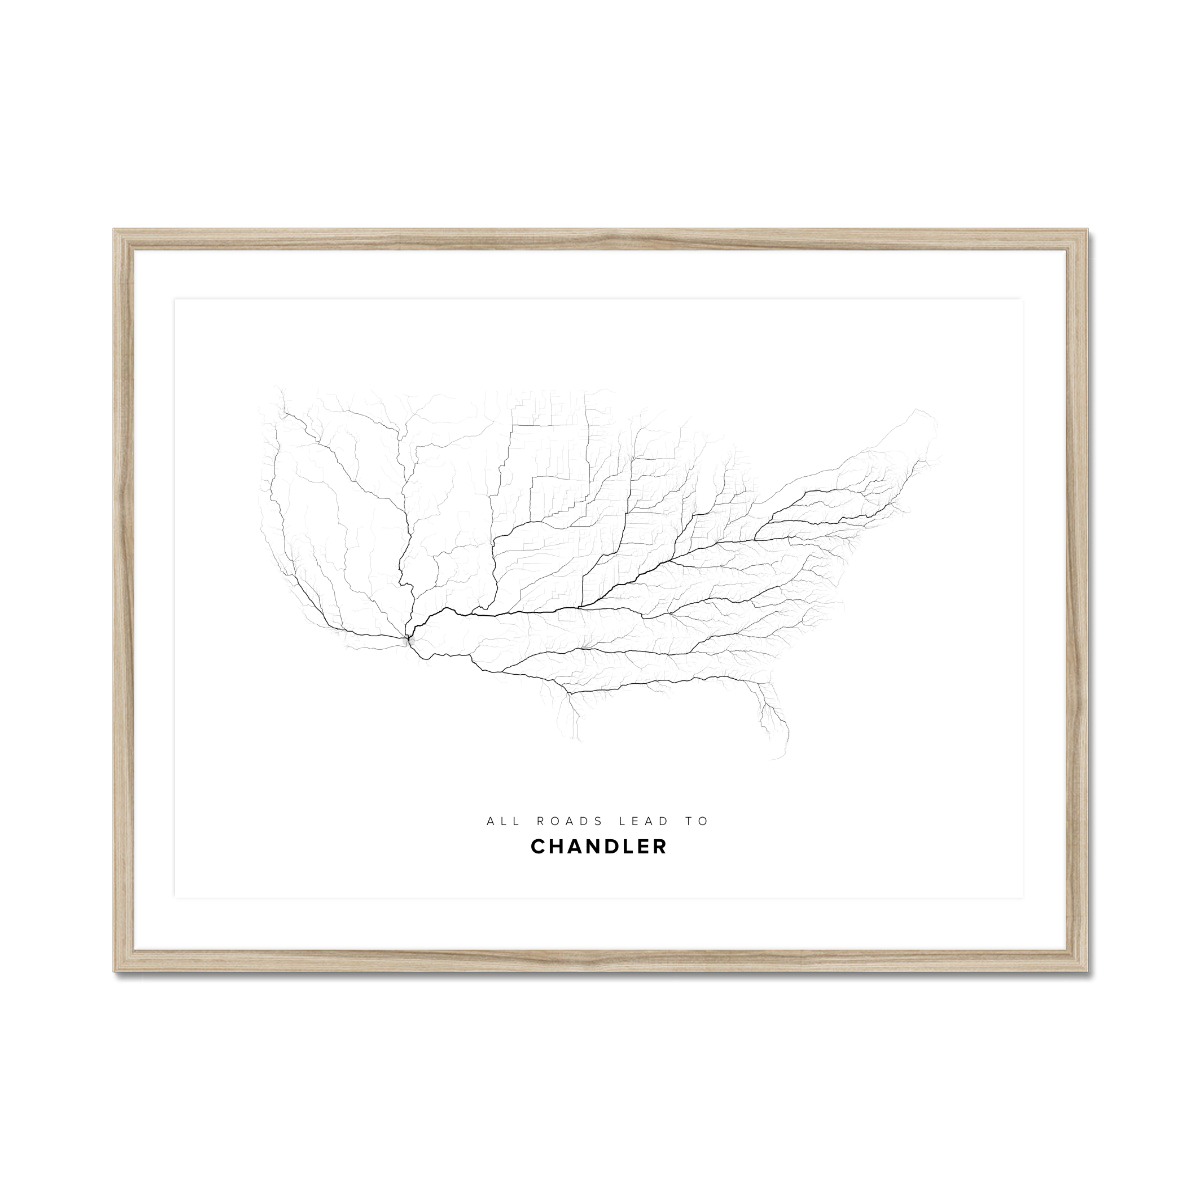 All roads lead to Chandler (United States of America) Fine Art Map Print